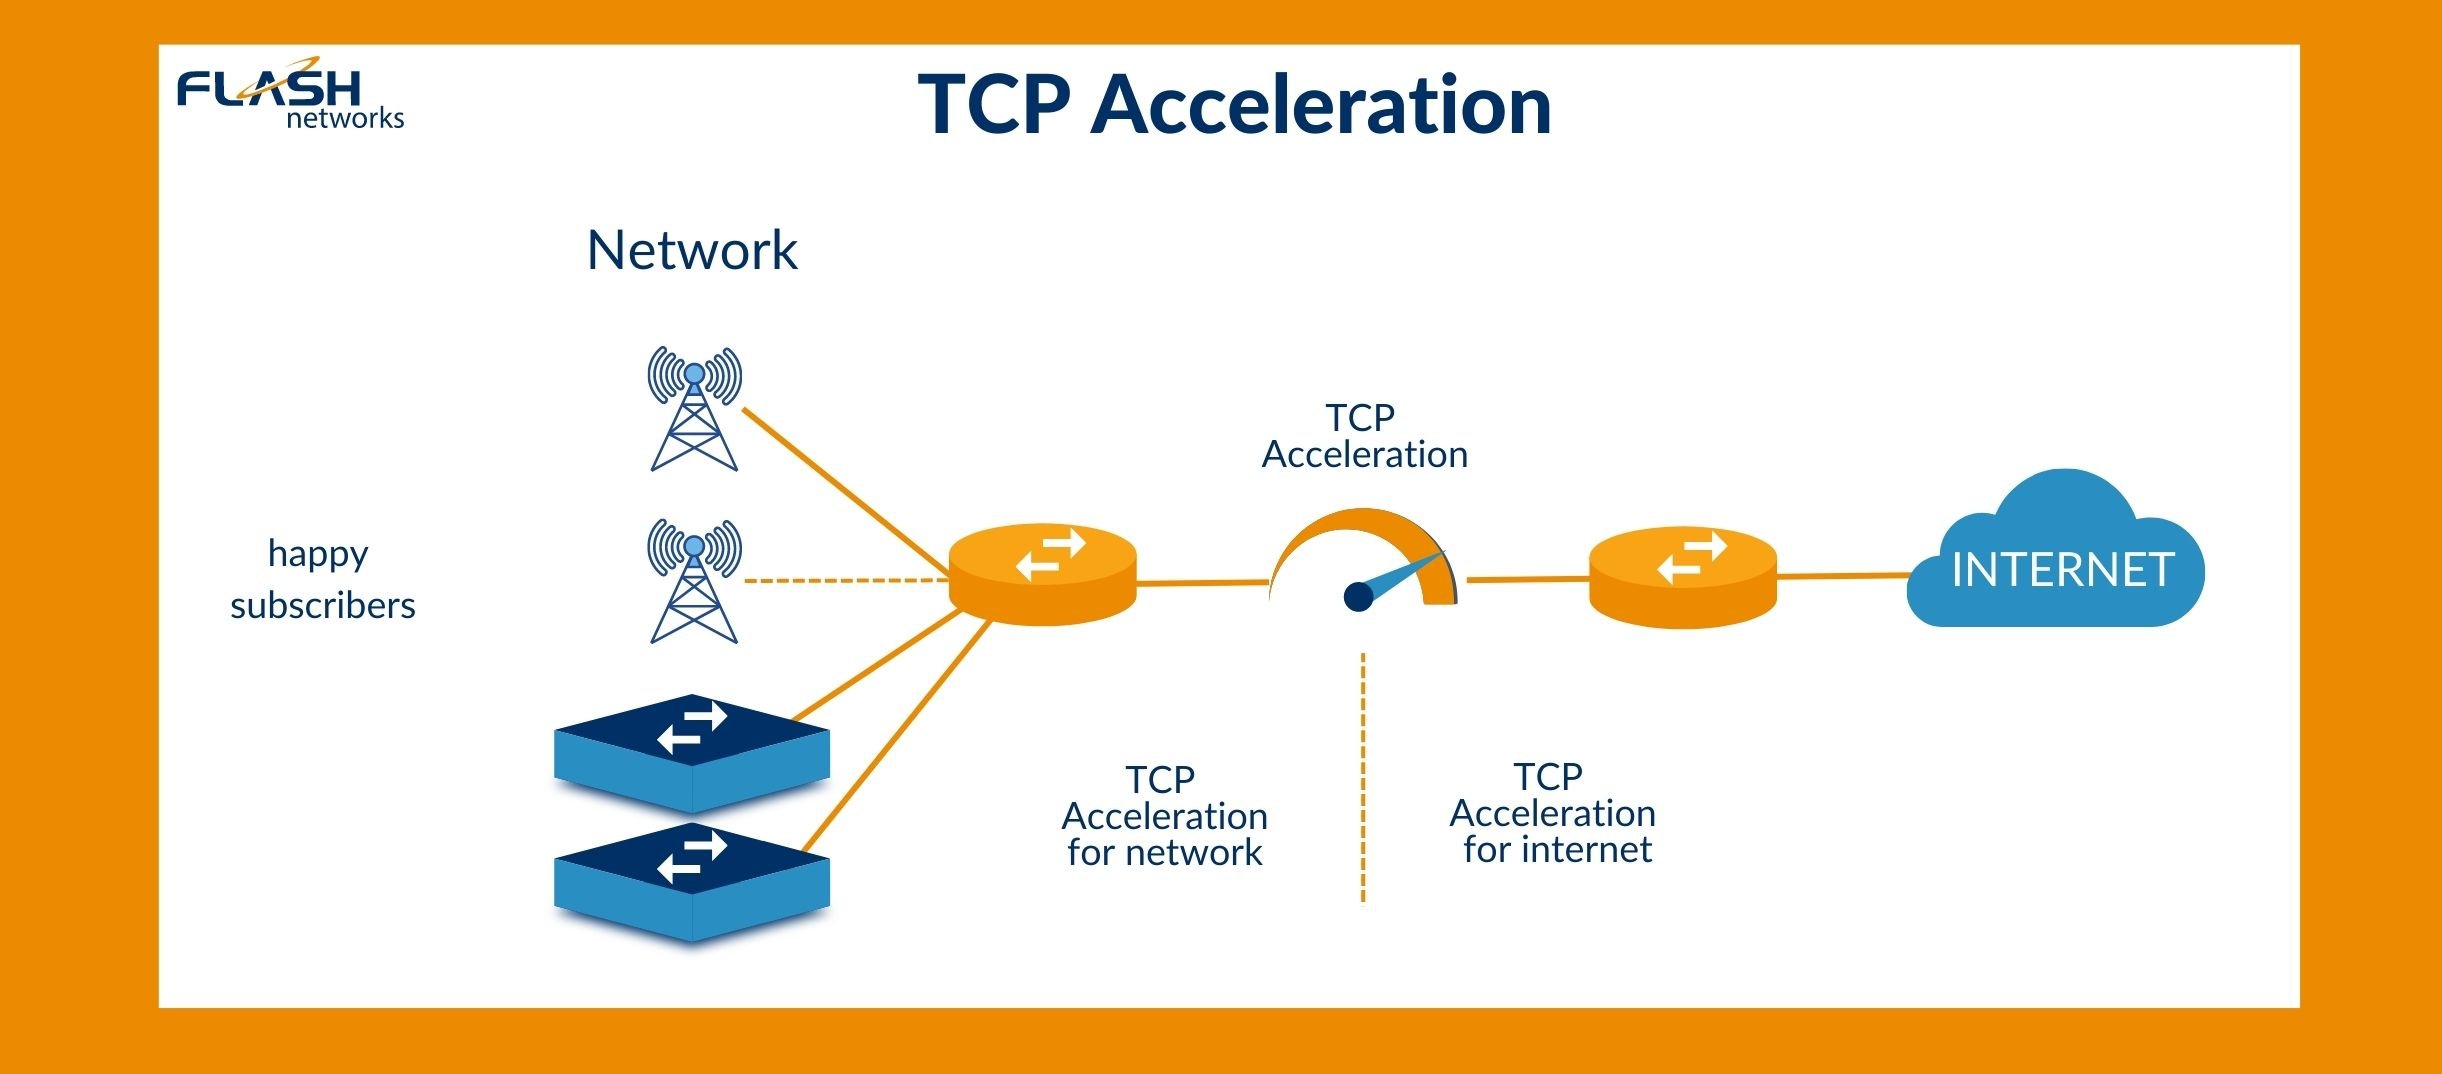 What is TCP acceleration and advantages